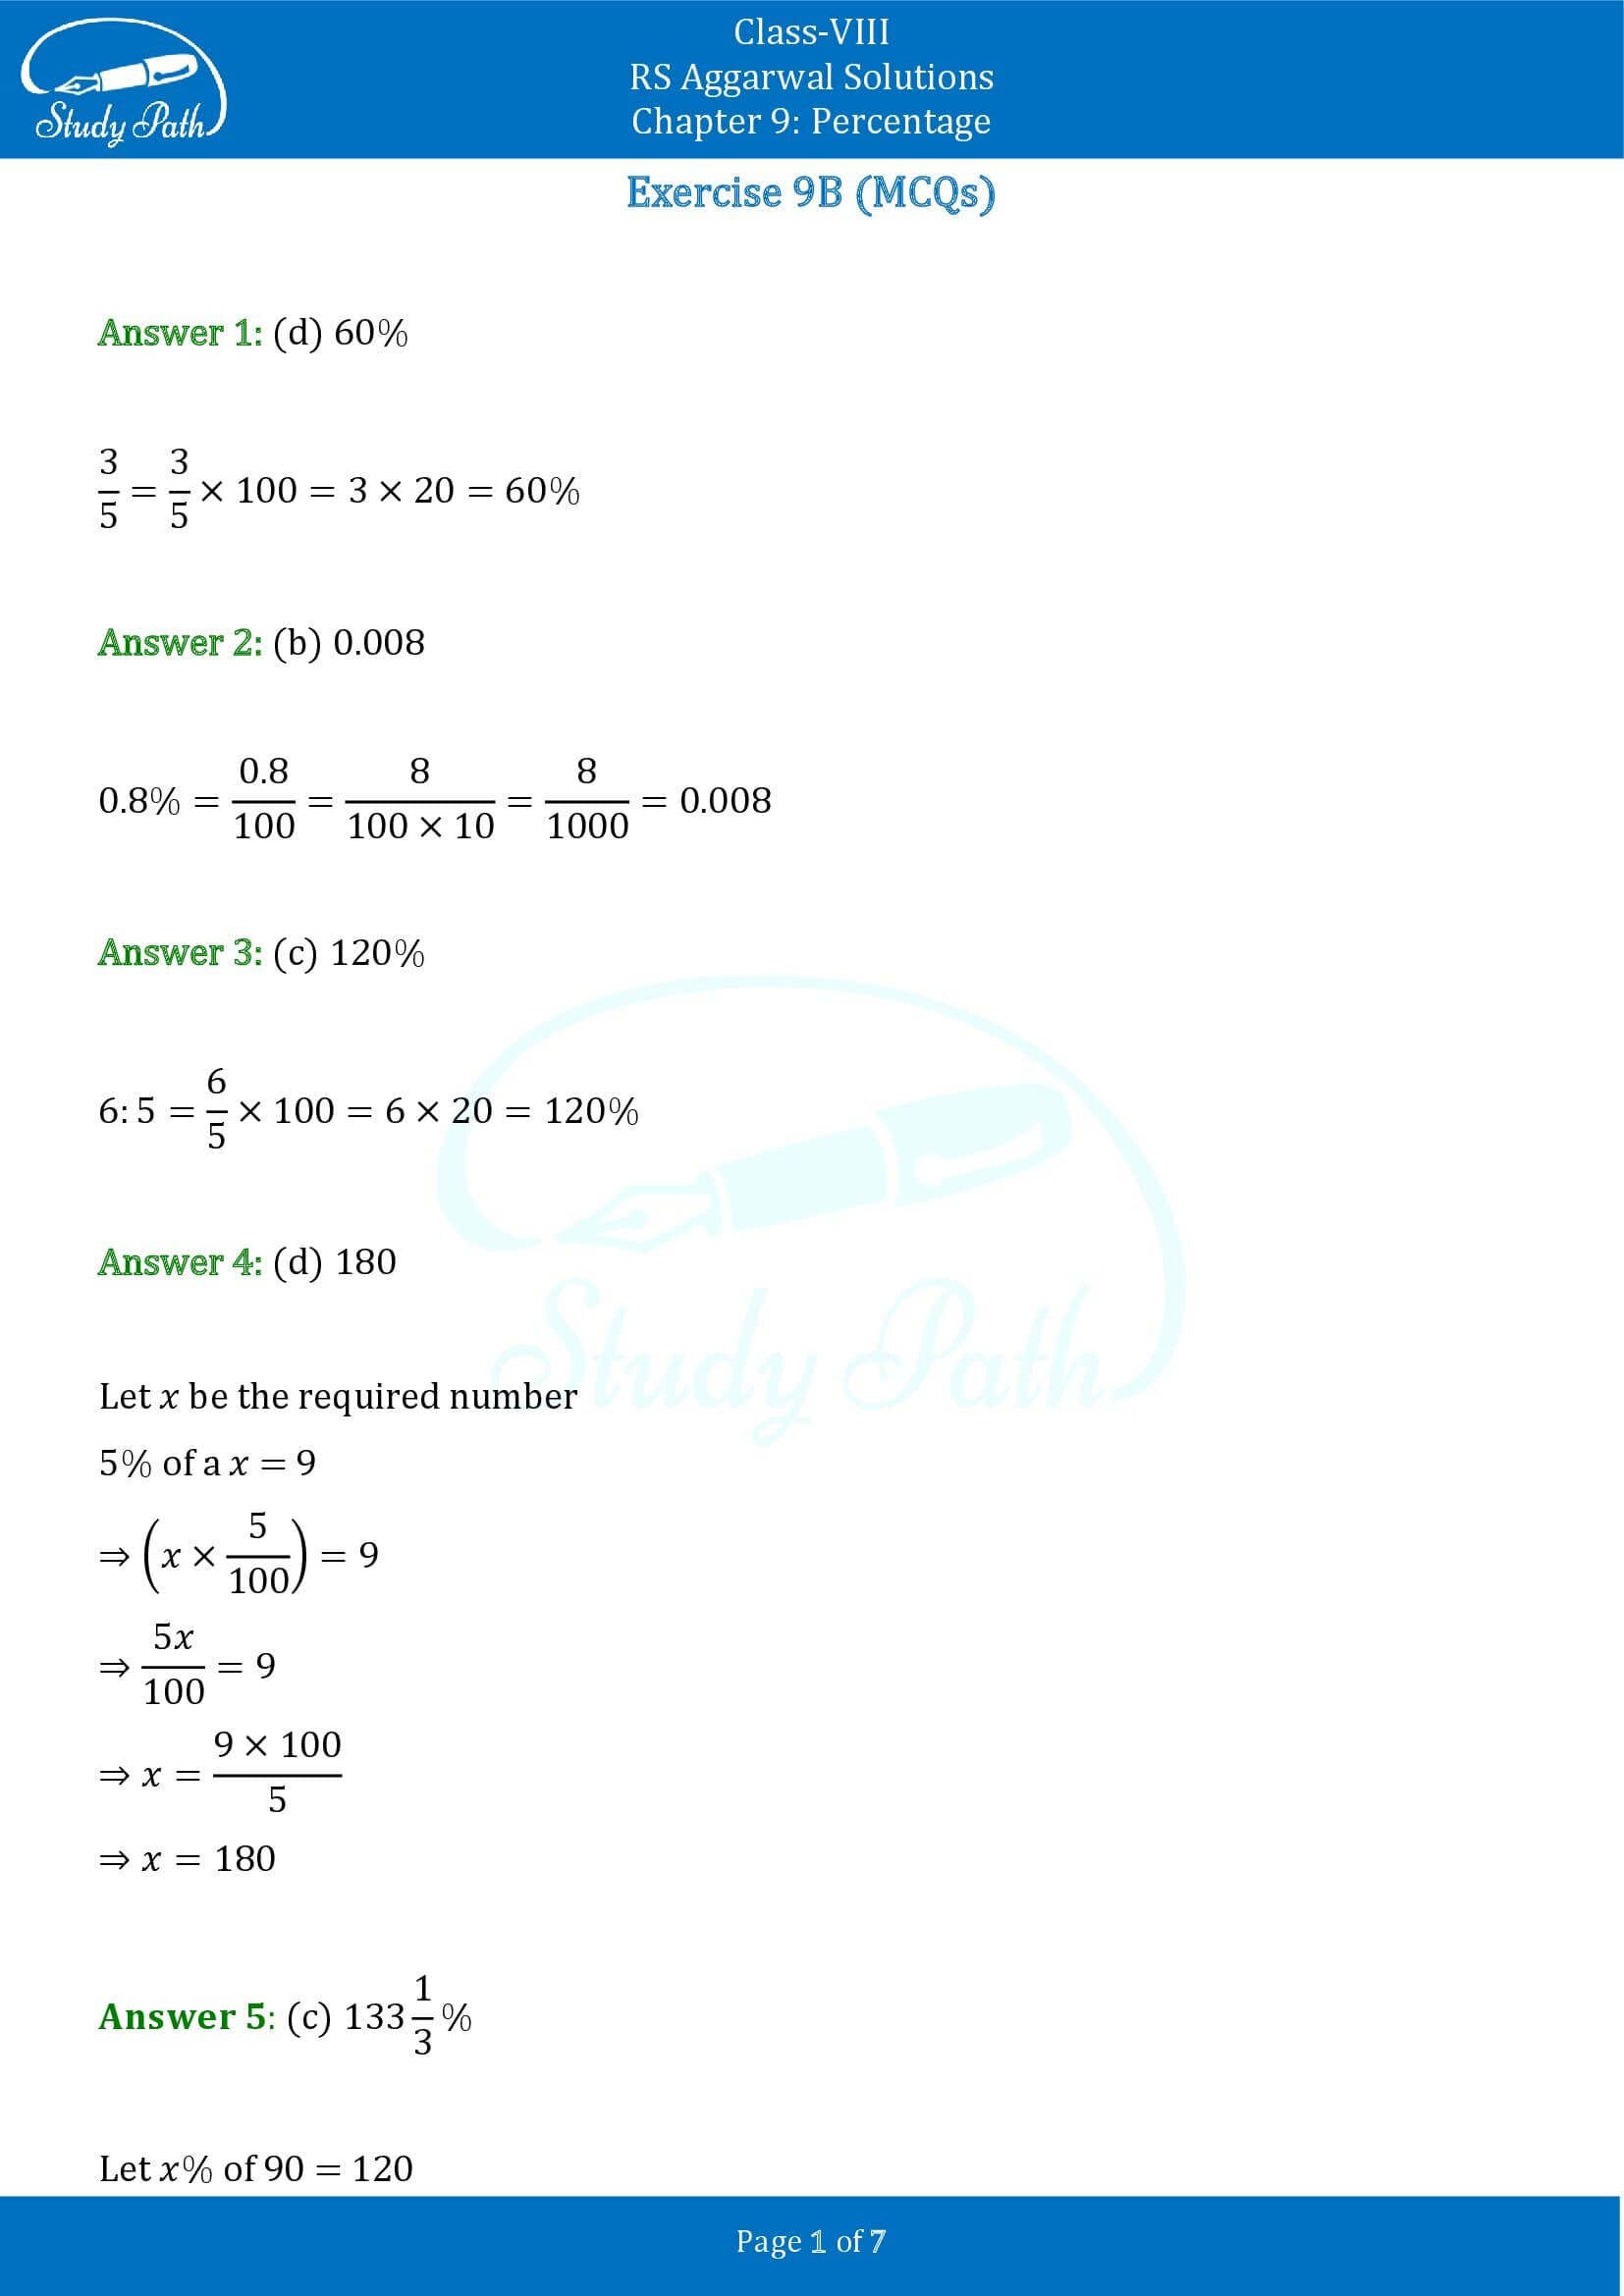 RS Aggarwal Solutions Class 8 Chapter 9 Percentage Exercise 9B MCQs 0001